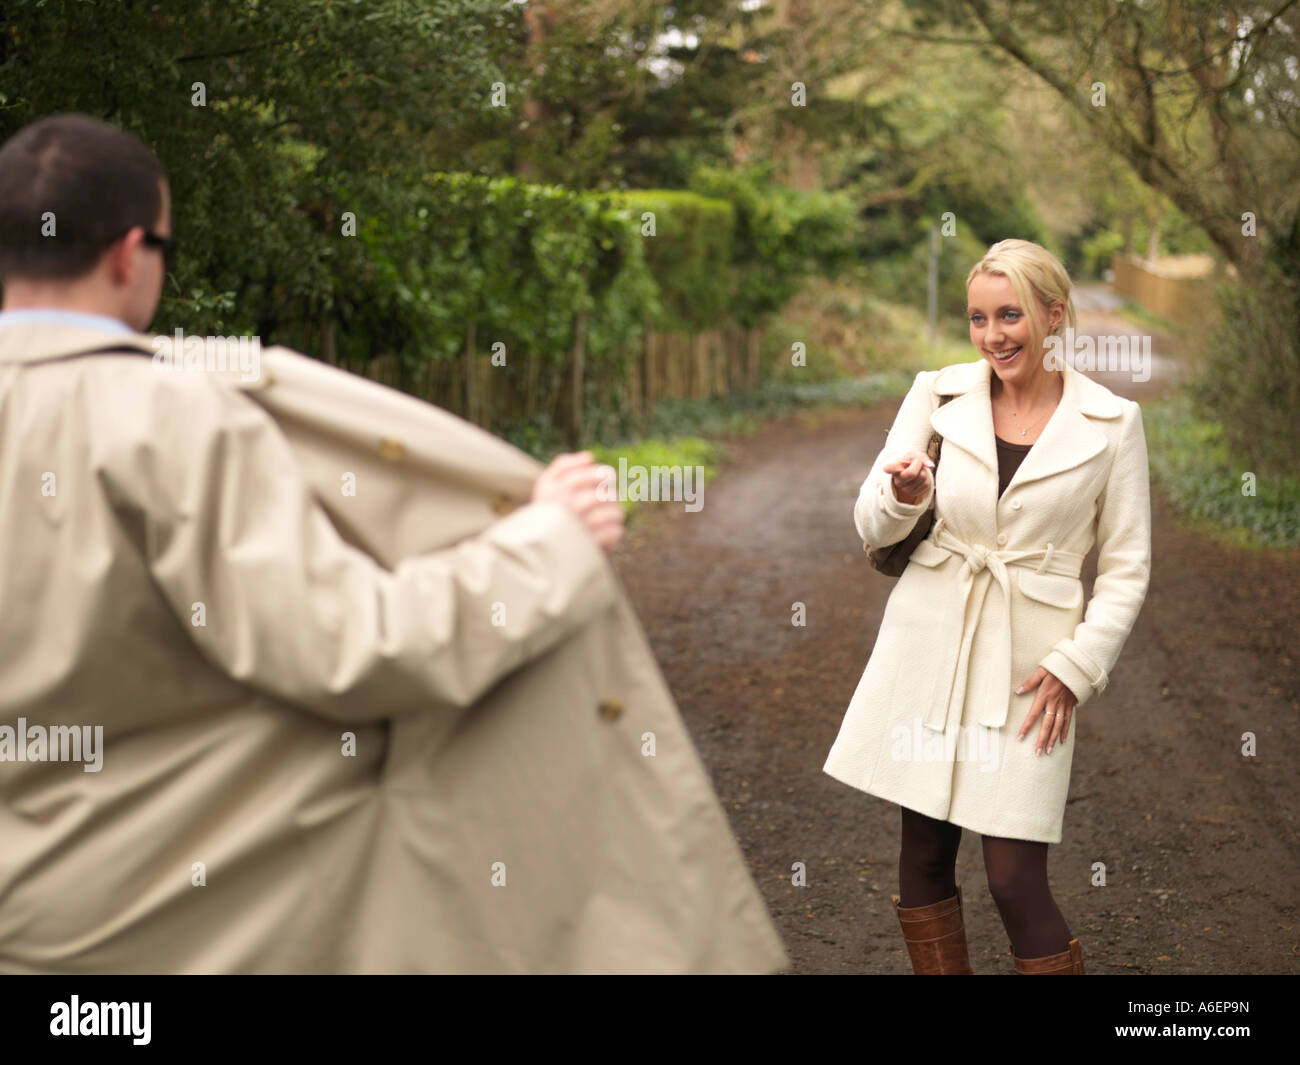 Young Man Flashing Model Released Stock Photo - Alamy